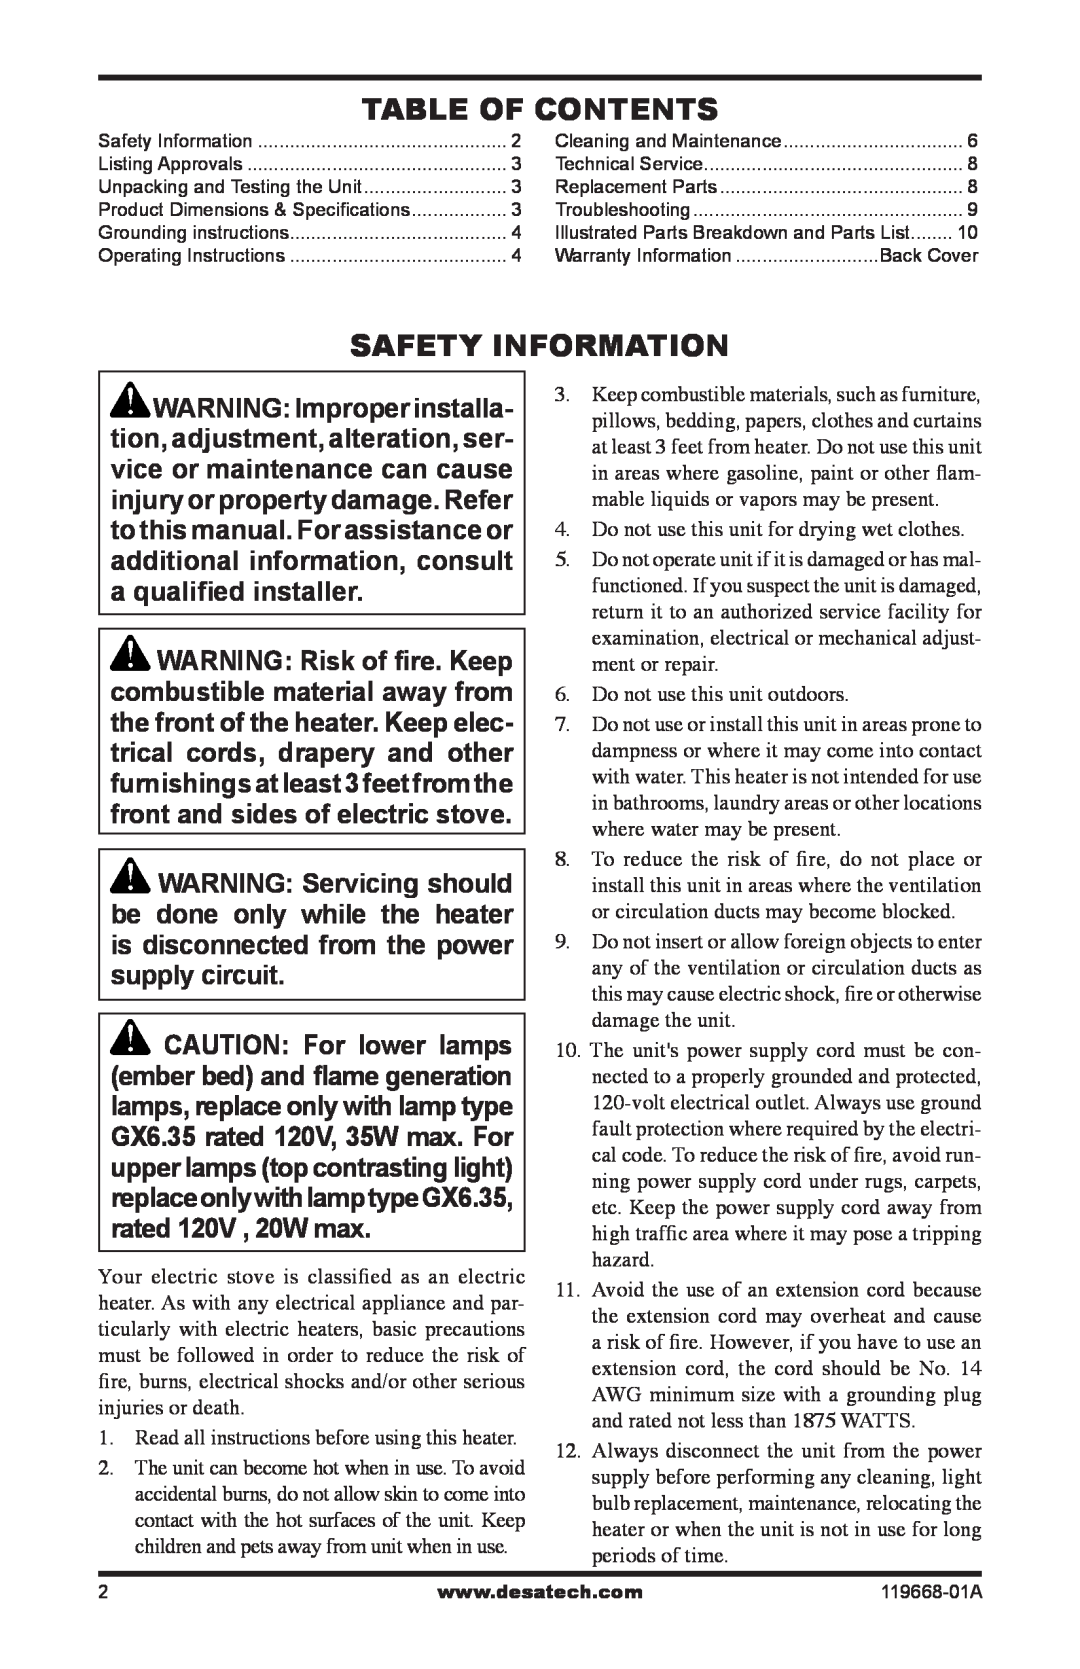 Desa VESBMRA, CGESBMRA operation manual Table of Contents, Safety Information 